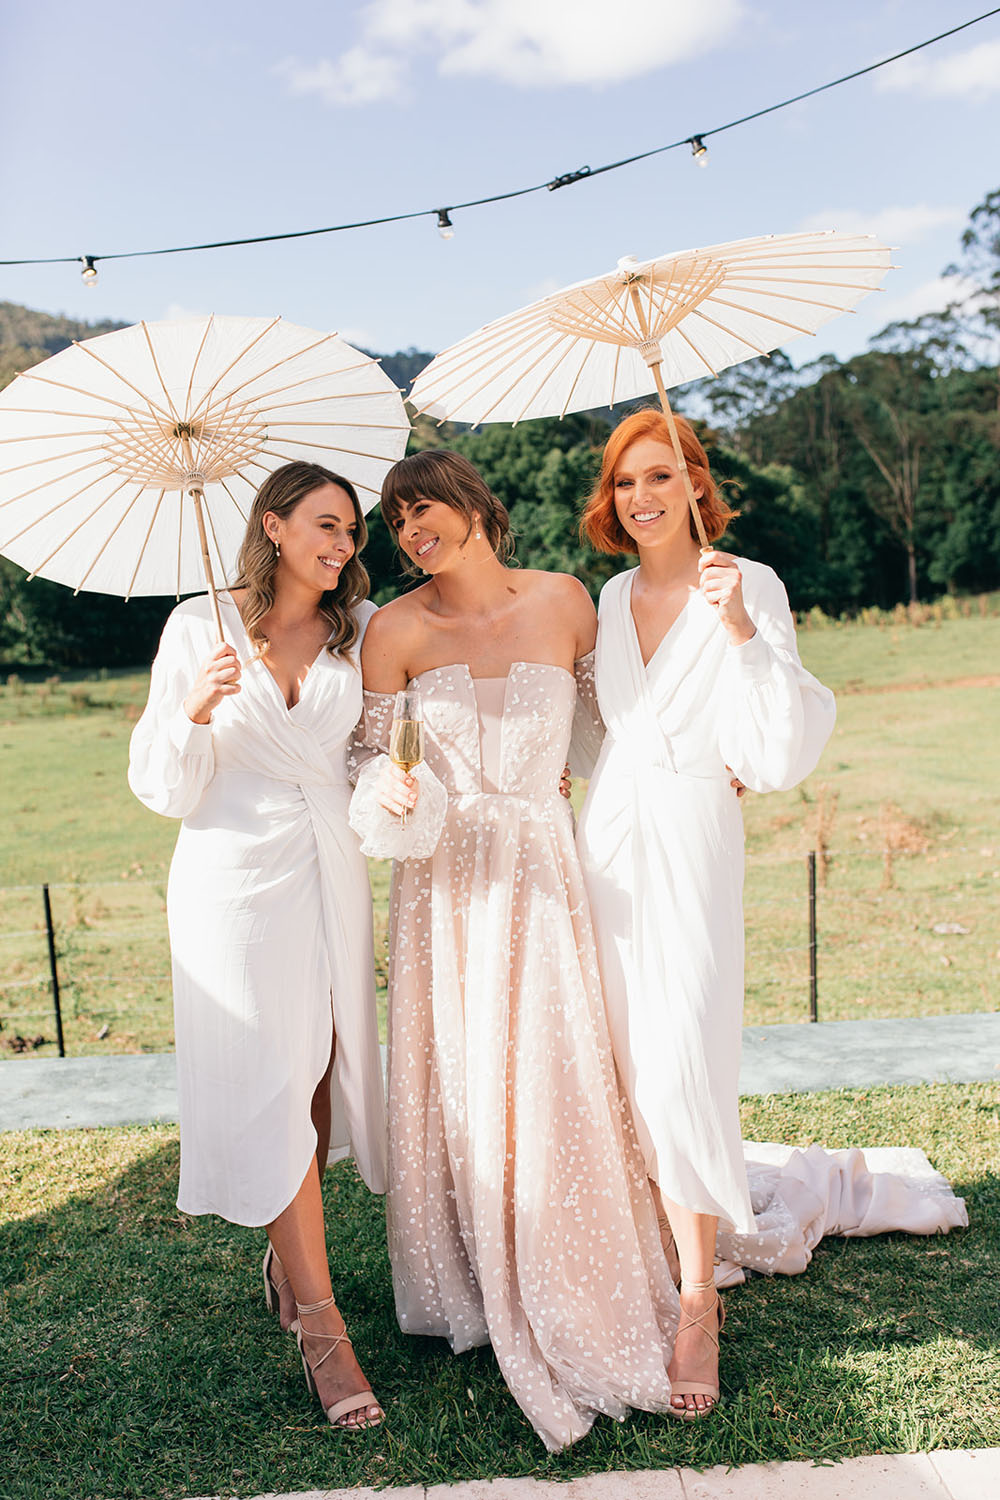 bridal party with parasols for wedding